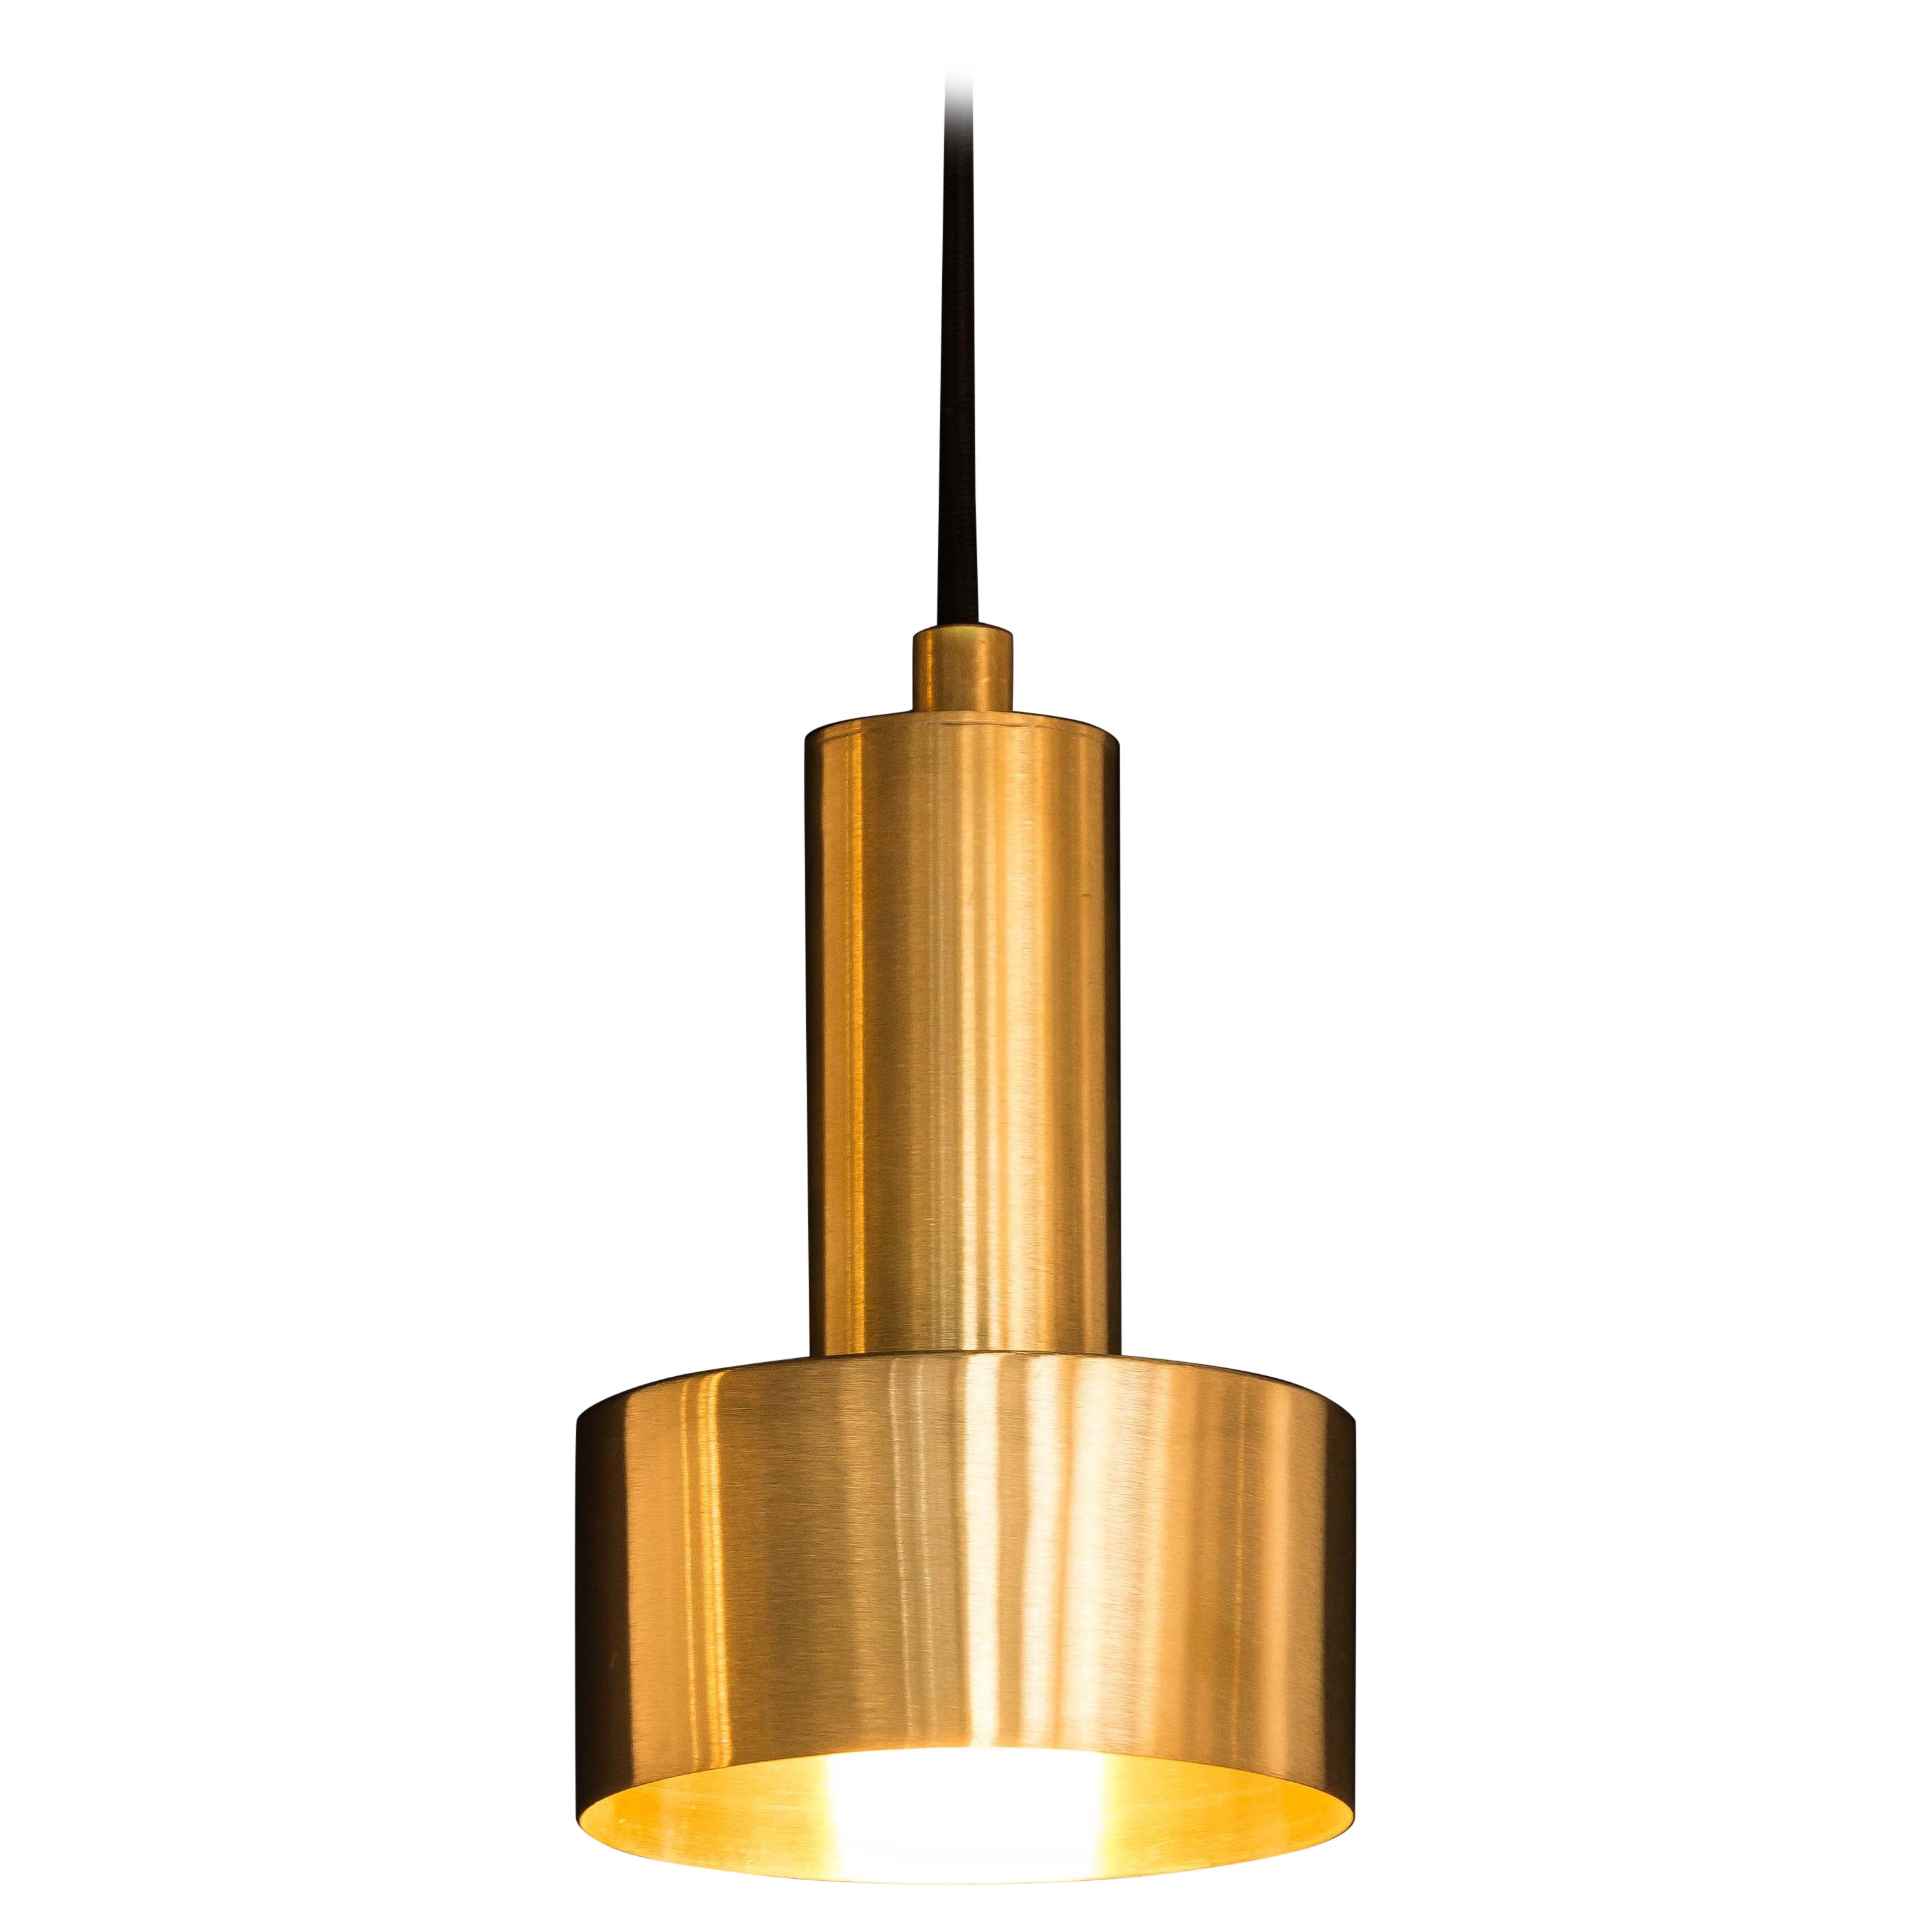 Natural Brass Contemporary-Modern Pendant Light Handcrafted in Italy by 247lab For Sale